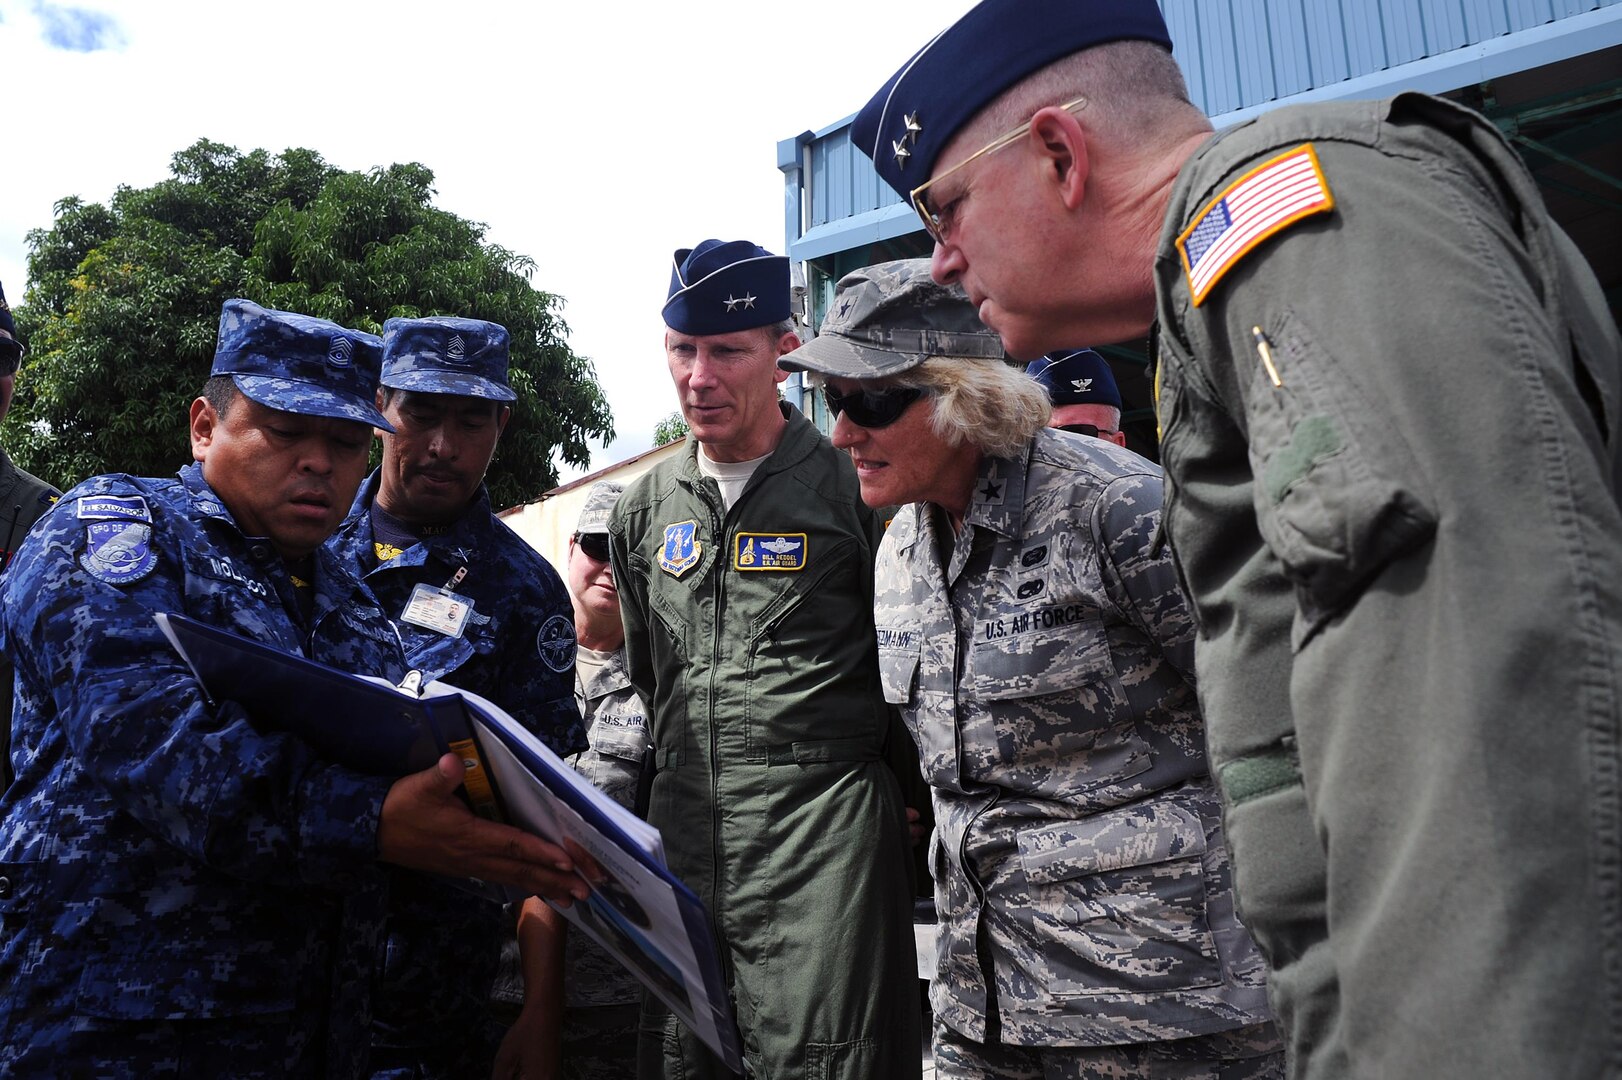 U.S. Air Force Maj. Gen. William Reddel III, center, in flight suit, adjutant general of the New Hampshire National Guard, and other senior leaders from the New Hampshire Guard look over maintenance records while visiting with members of the El Savadoran 1st Air Brigade near San Salvador, El Salvador, Jan. 27, 2012. Reddel met with Salvadoran military officials as part of the State Partnership Program, which builds relationships between the National Guard in the states and territories and partnered nations worldwide. New Hampshire is in its 12th year of partnering with El Salvador.